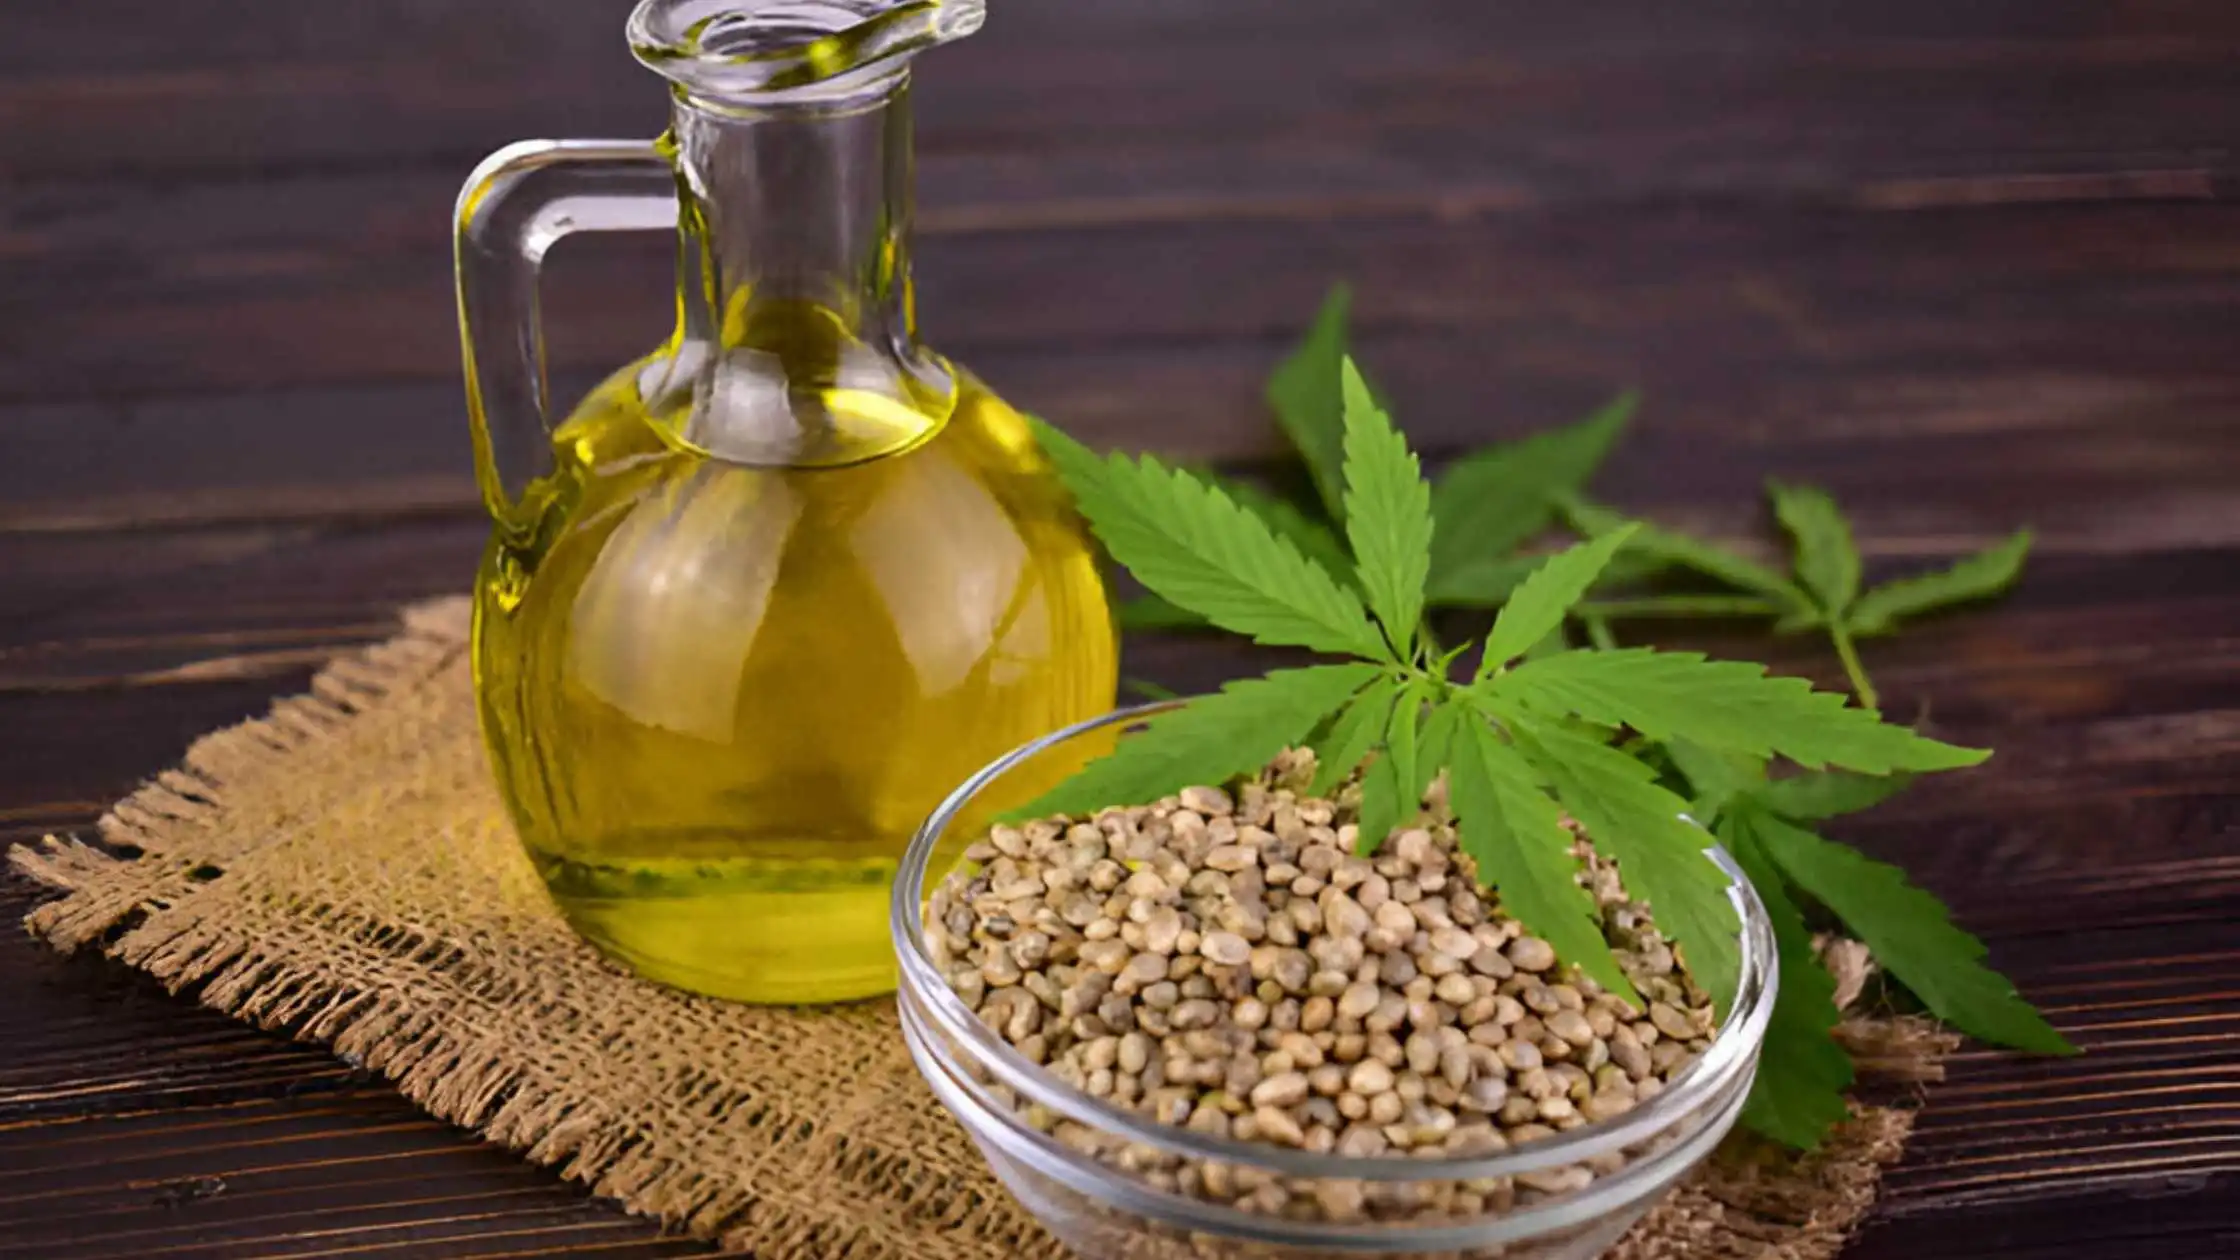 Hempstrol﻿ to Spread the Advantages of Hemp in India